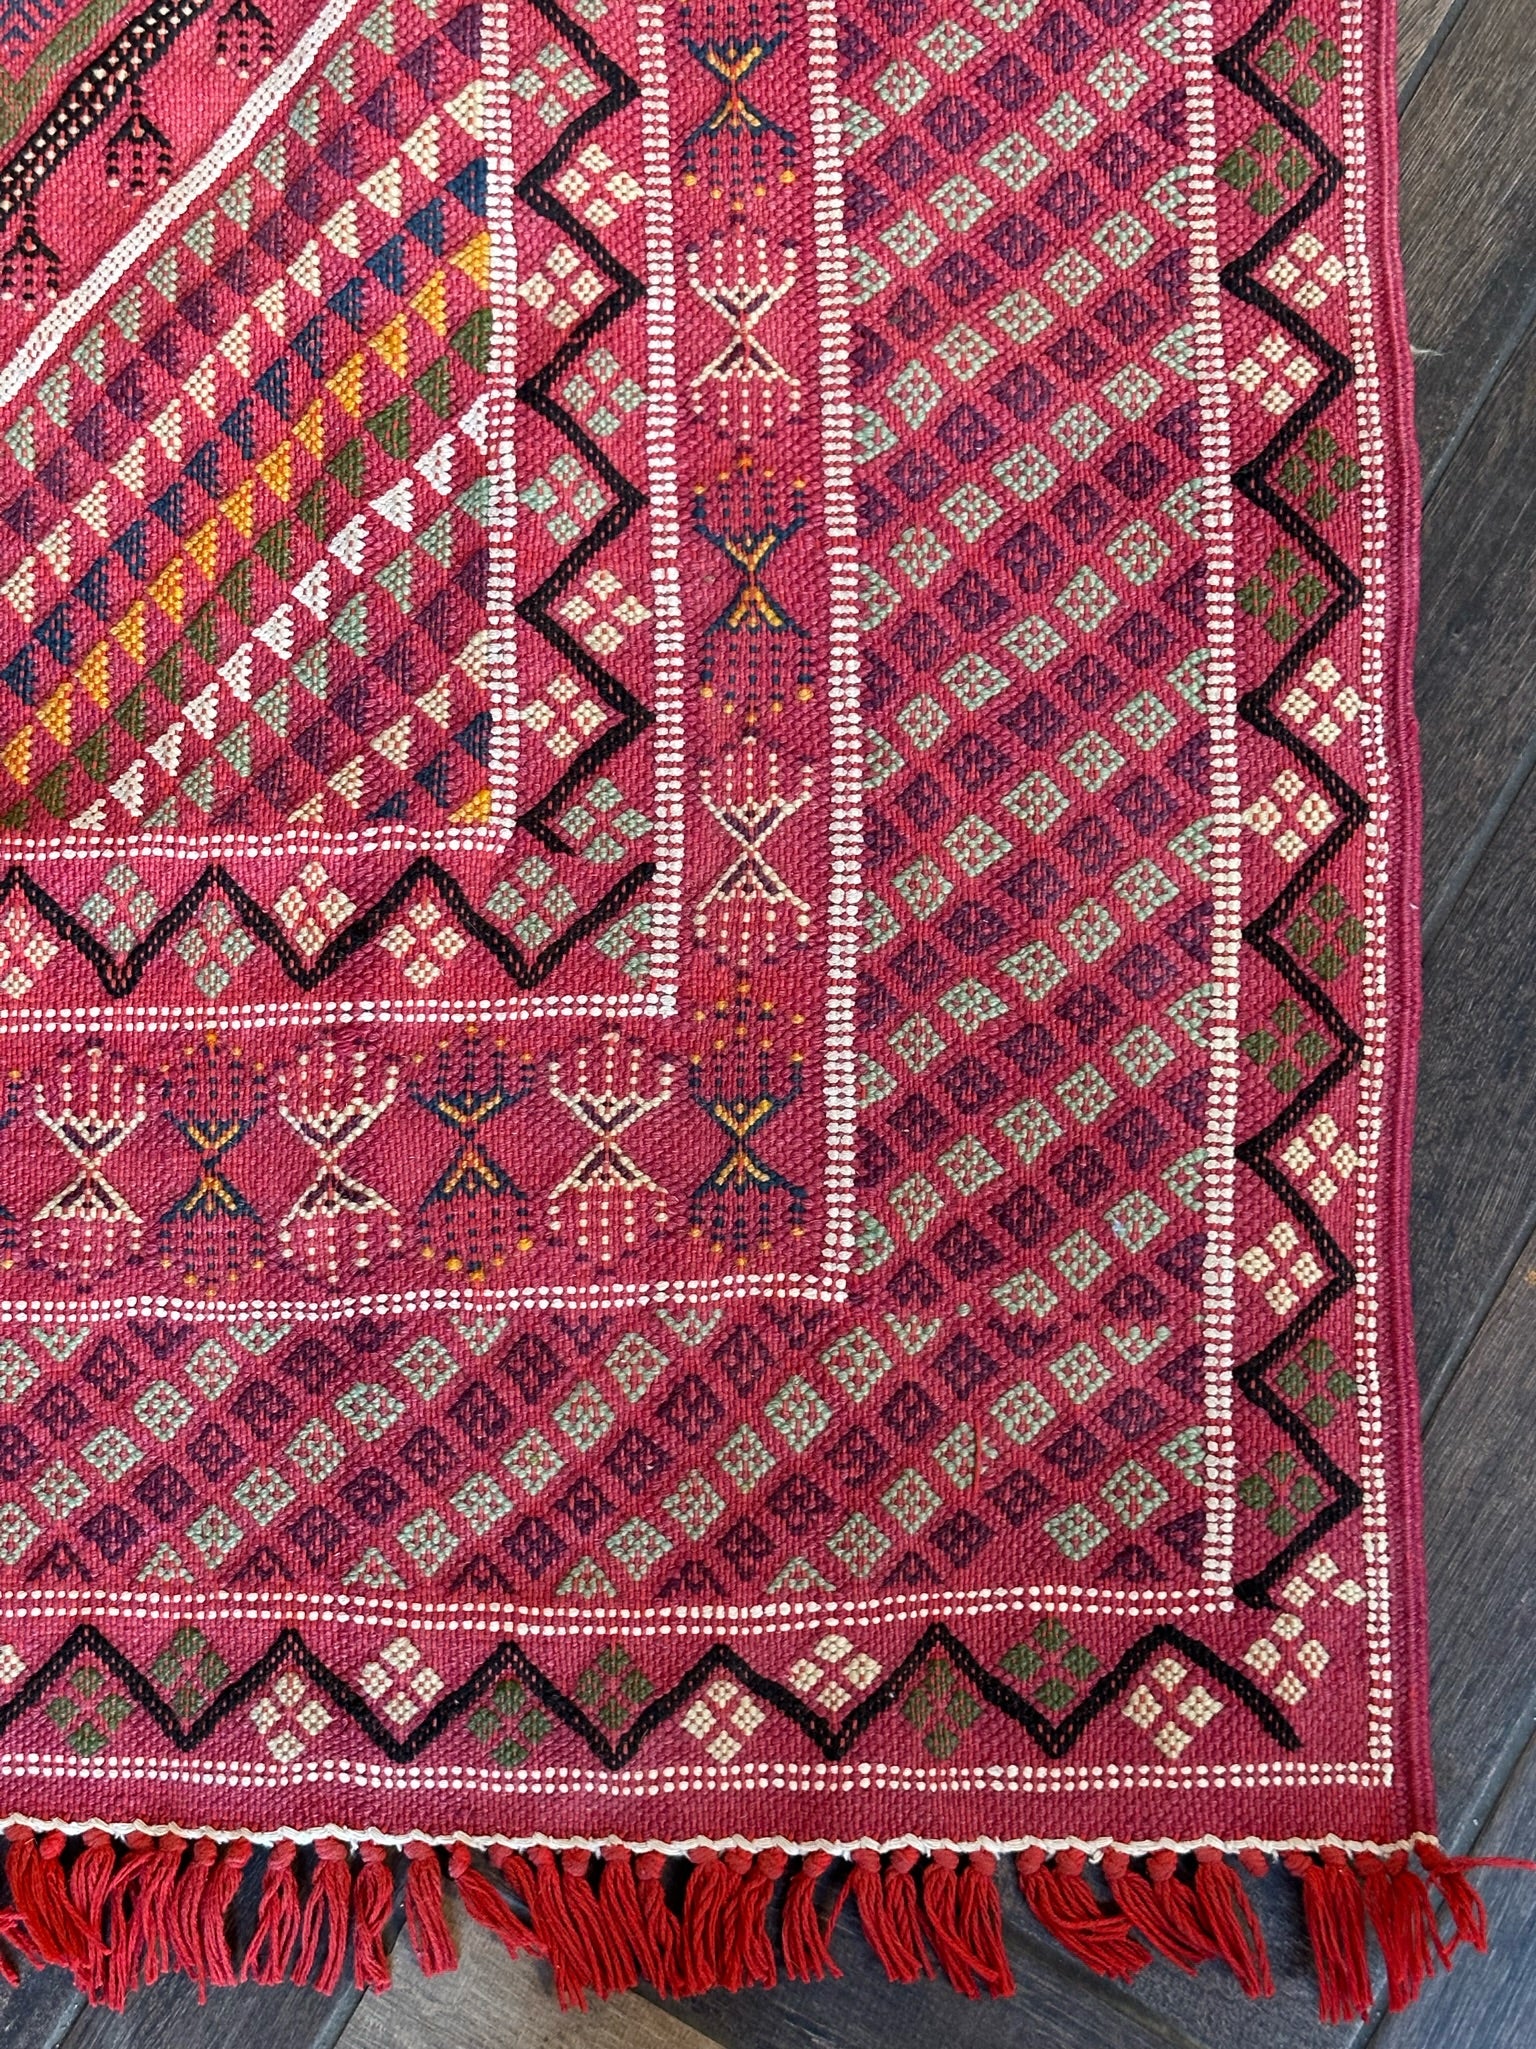 bright pink embroidered Turkish area rug with fringe